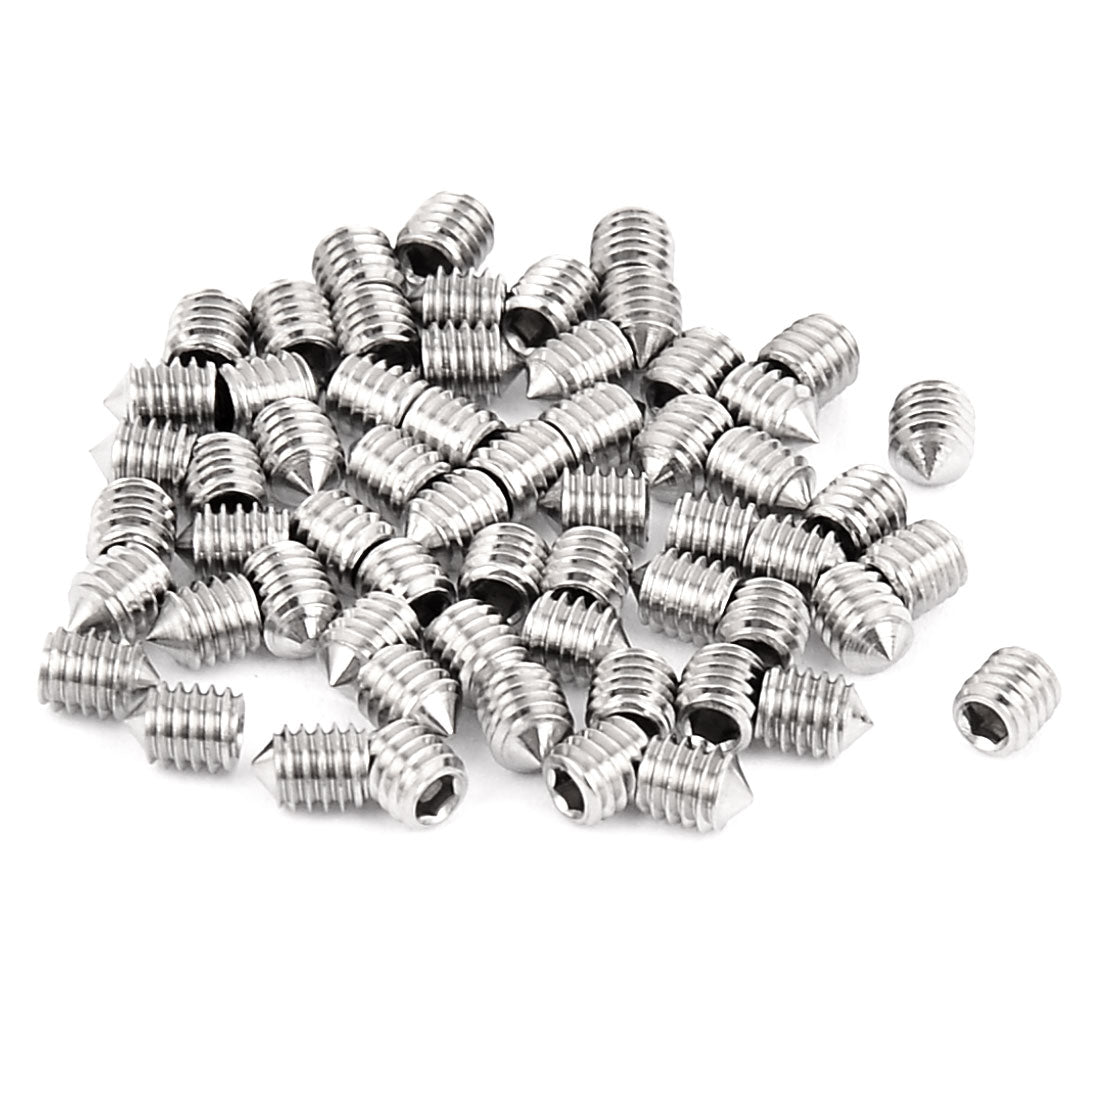 Uxcell 60pcs M4 x 5mm 304 Stainless Steel Hex Socket Cone Point Grub Screw